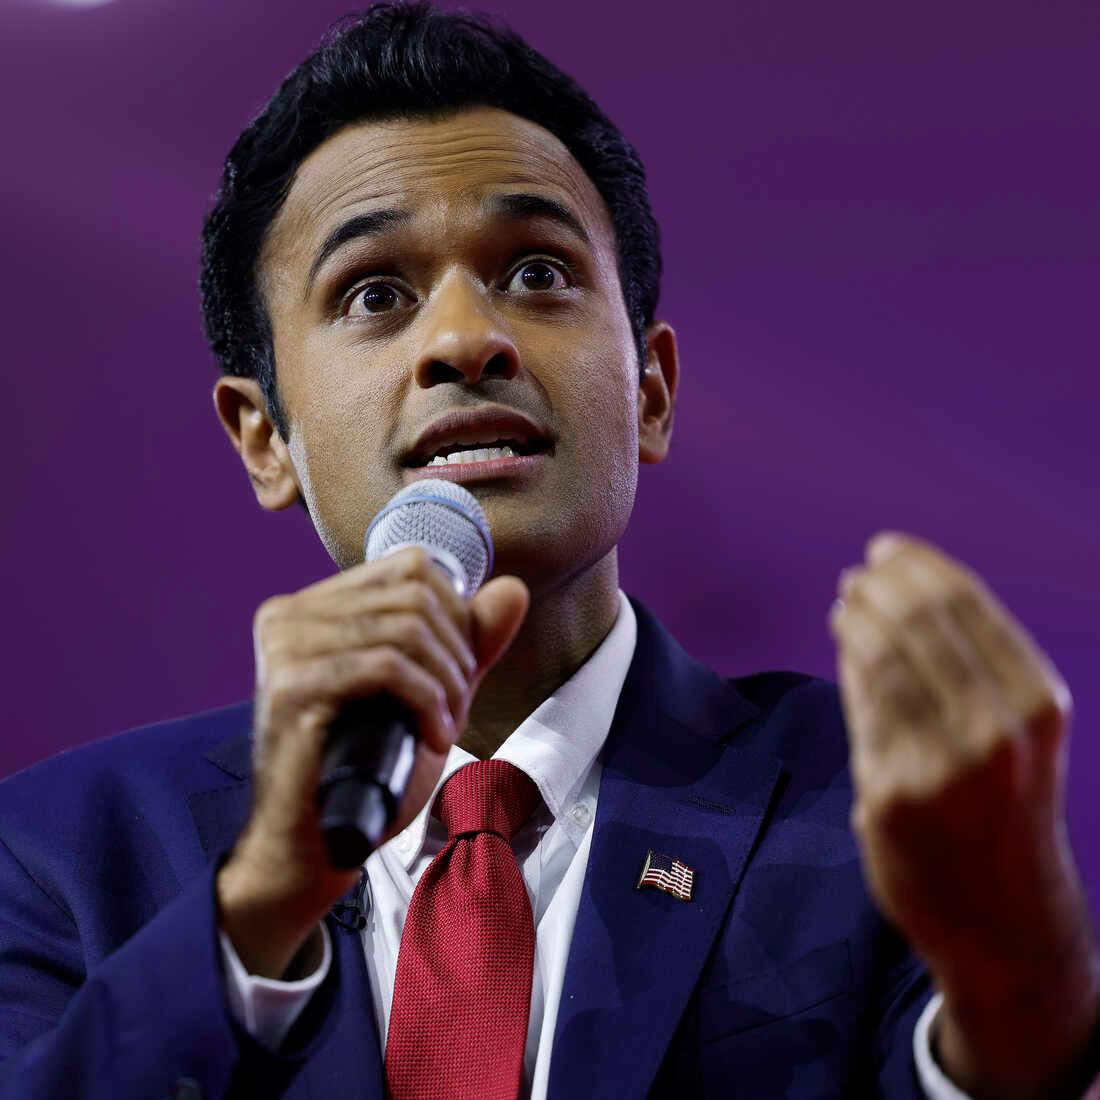 After Robert F. Kennedy Jr, US Republican presidential candidate Vivek Ramaswamy also announces that he is accepting donations in Bitcoin for his campaign